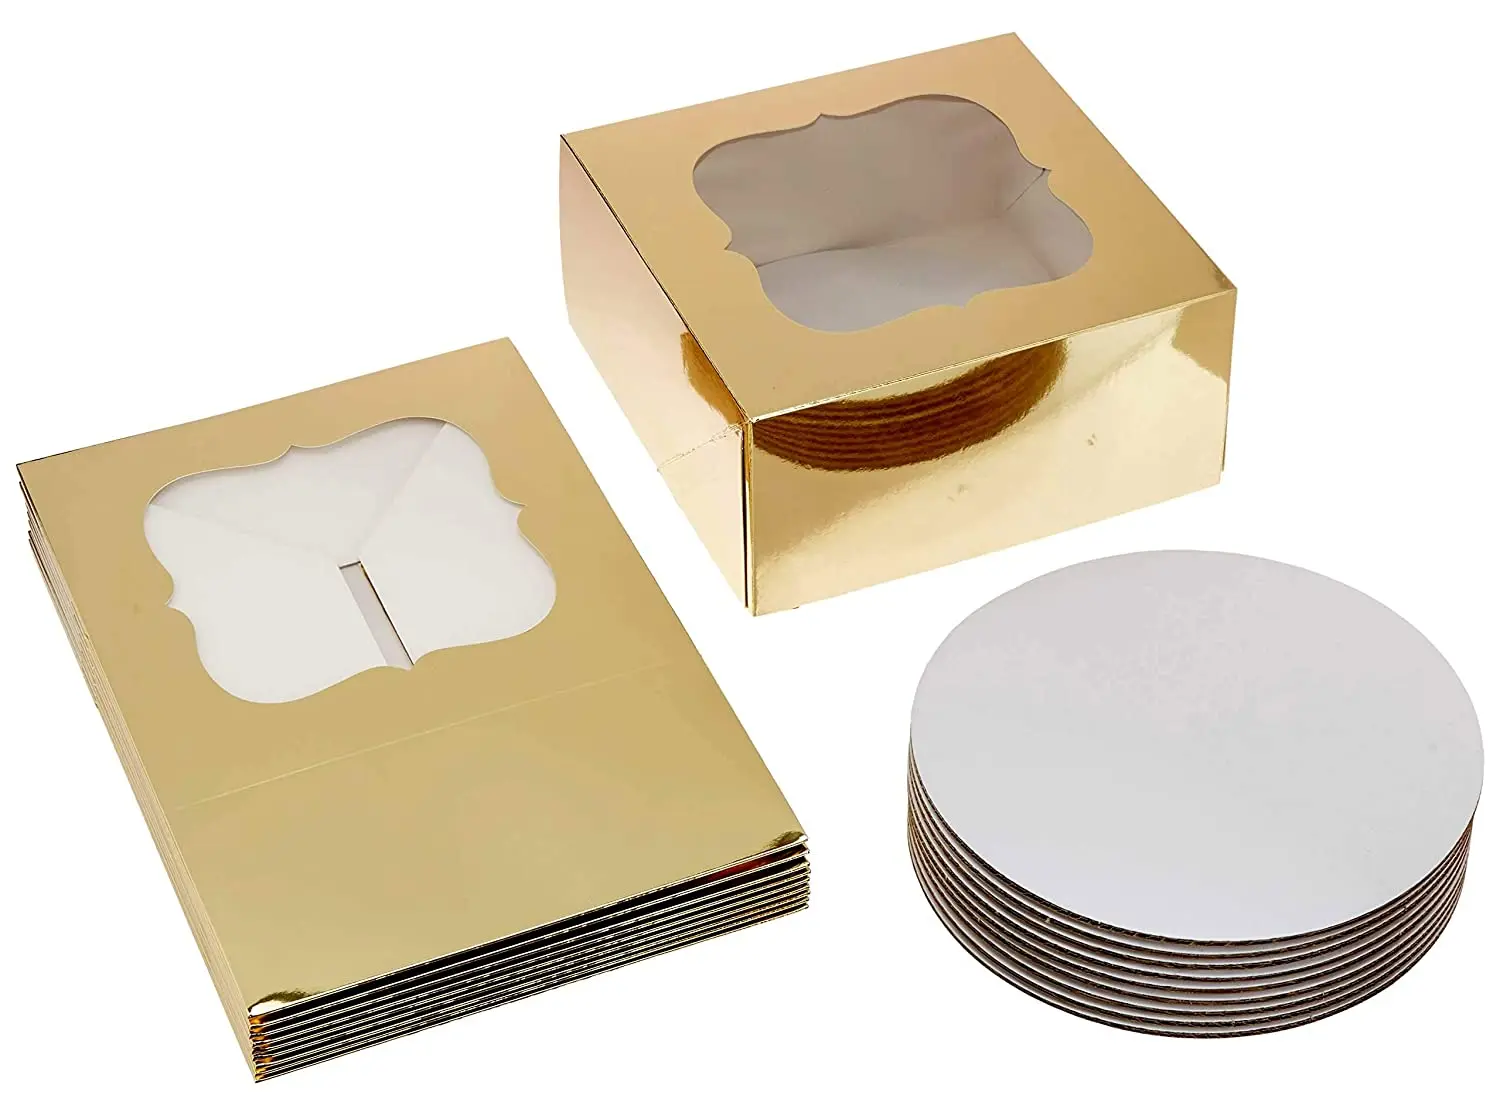 Square cake boards and boxes